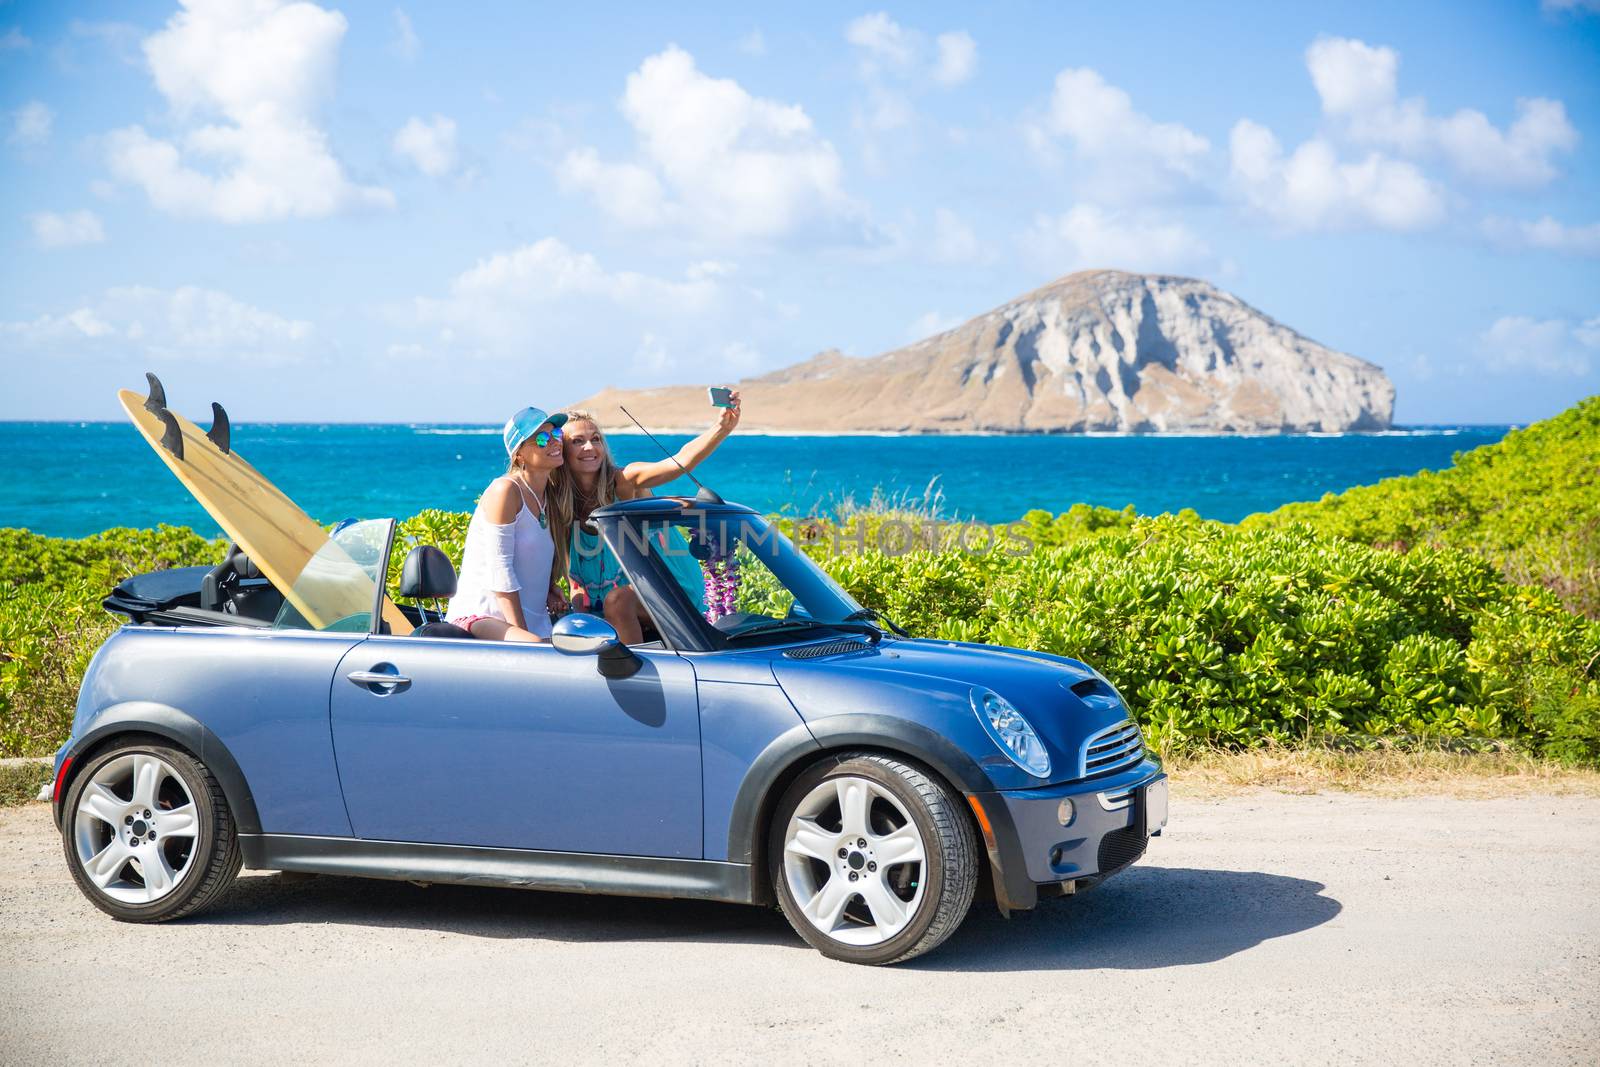 Car road trip vacation young people taking selfie photo with phone during summer travel vacation. Tourists couple taking photos on Hawaii in convertible car, with smartphone camera